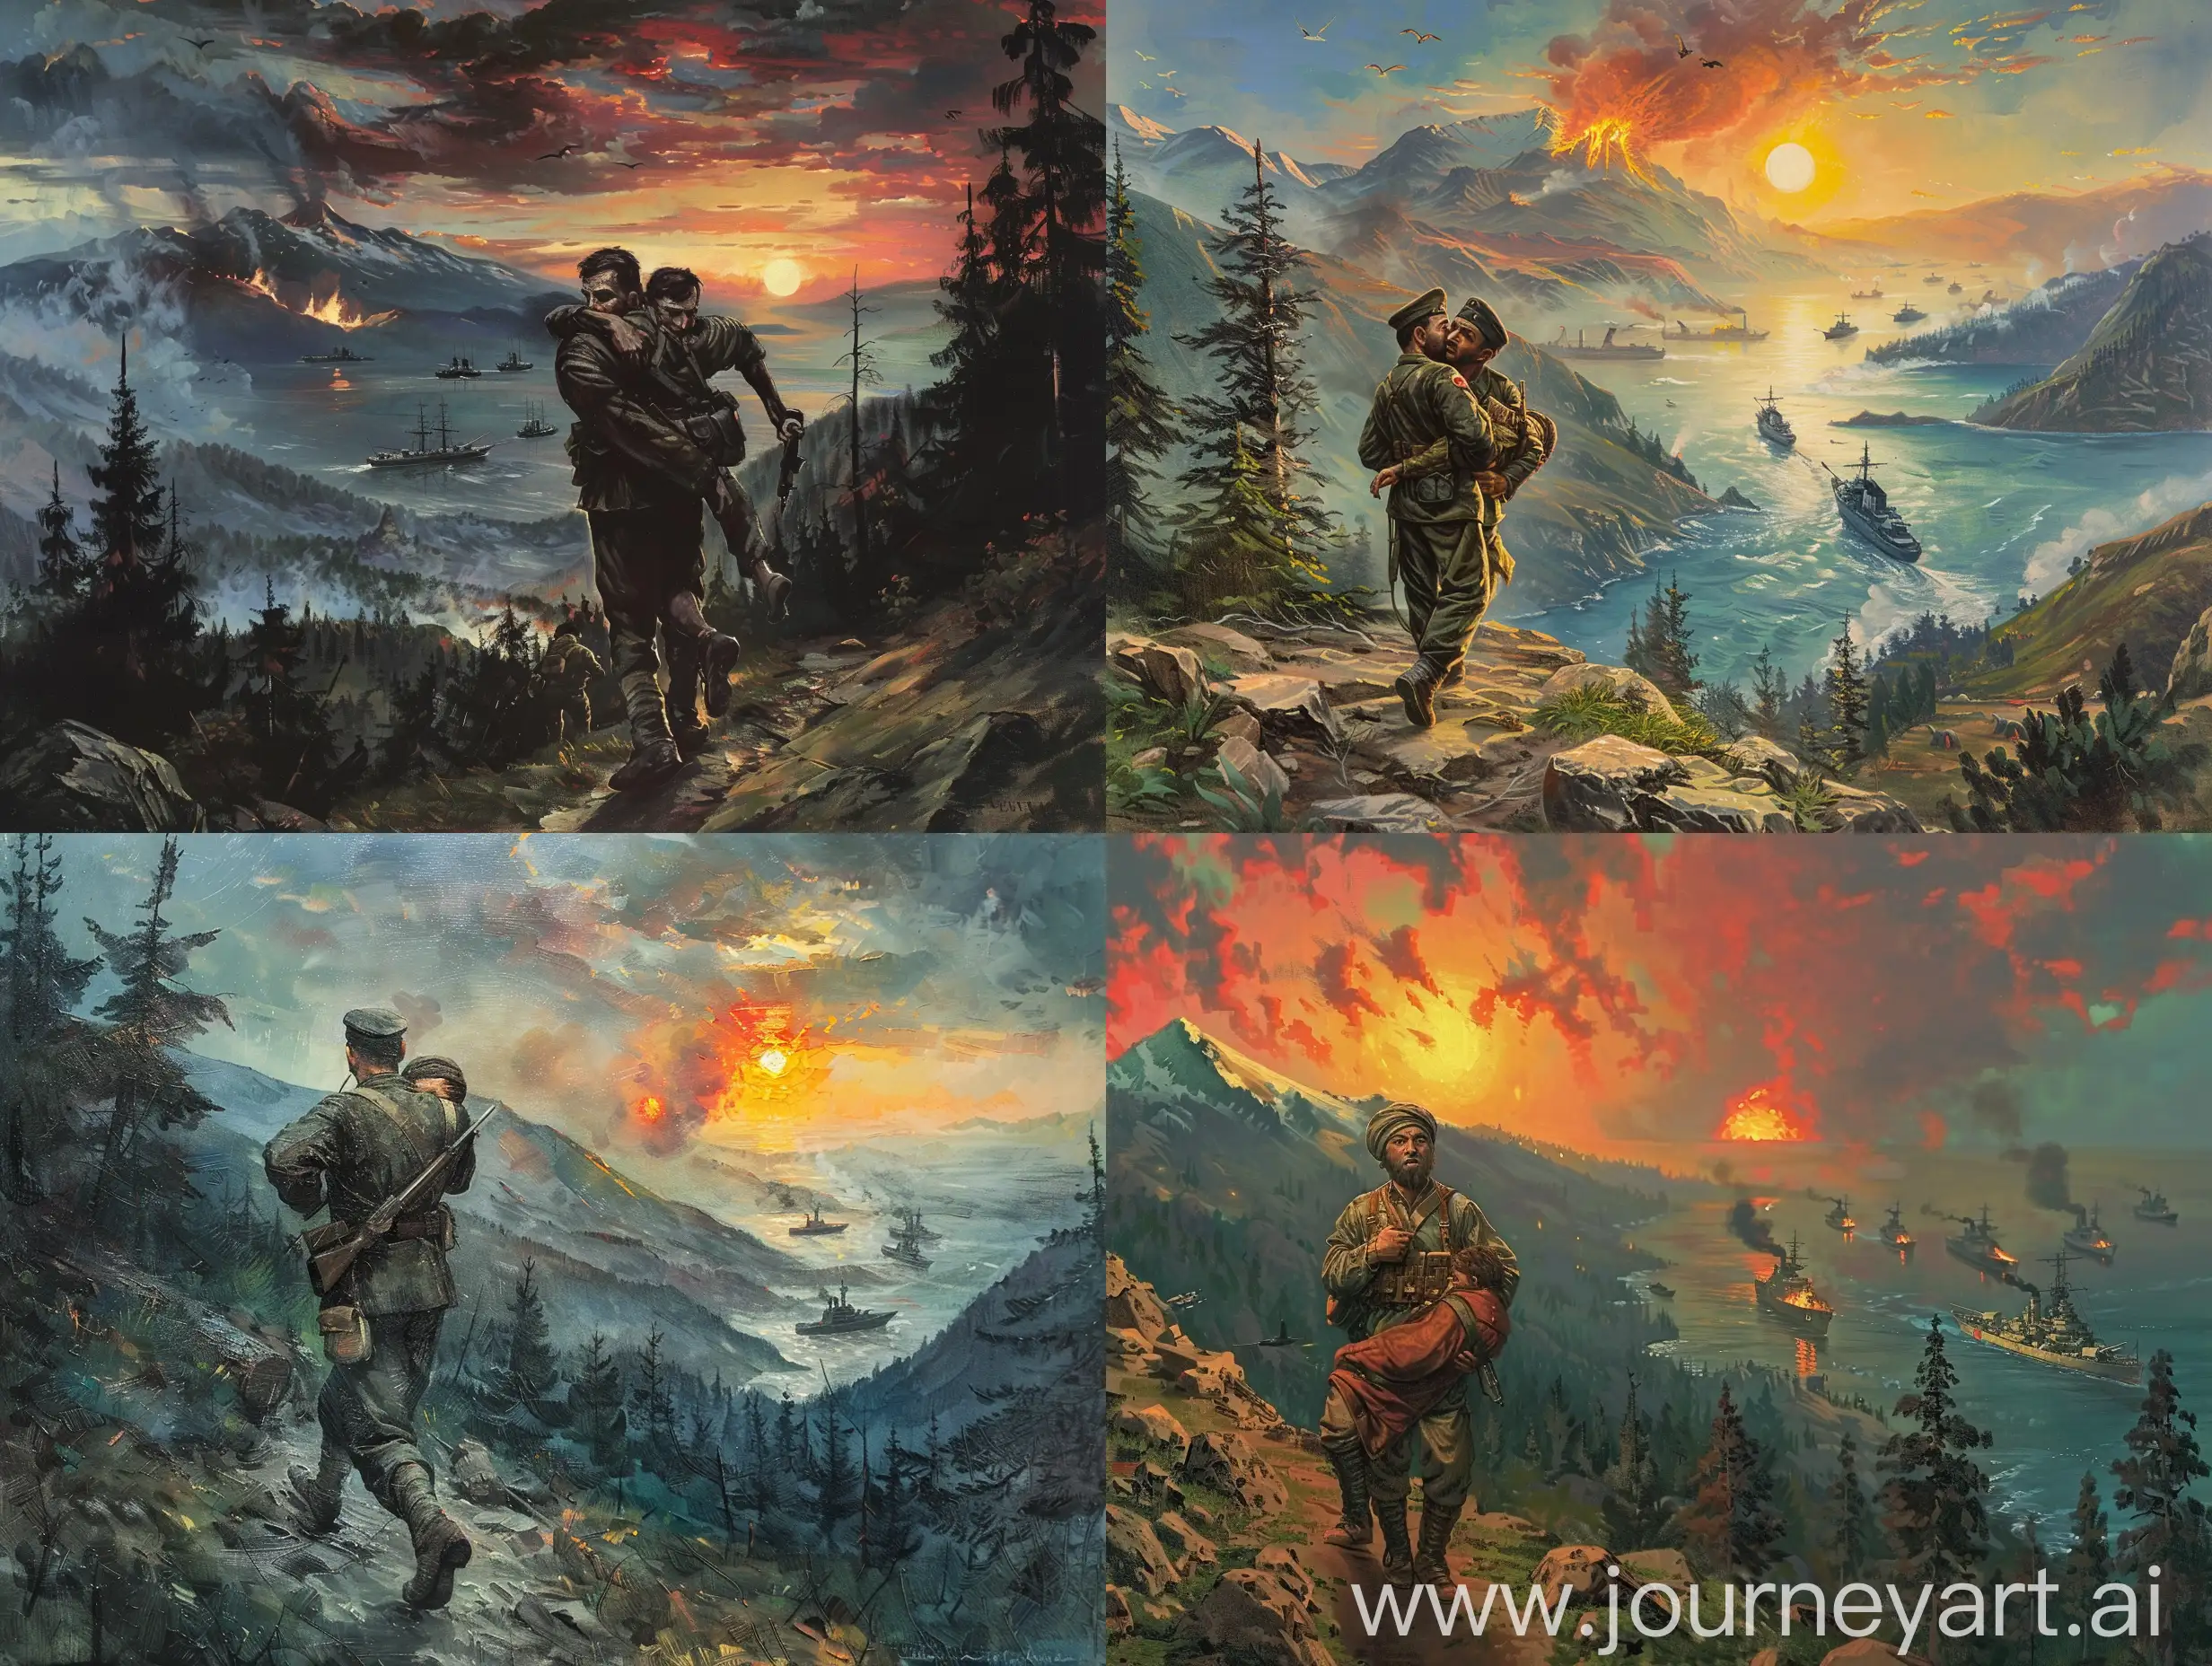 An Ottoman soldier during World War II carries his wounded friend on his back, a mountain view, the sun rising, a forest fire in the distance, warships coming from the sea, illustration drawing, oil painting artistic painting